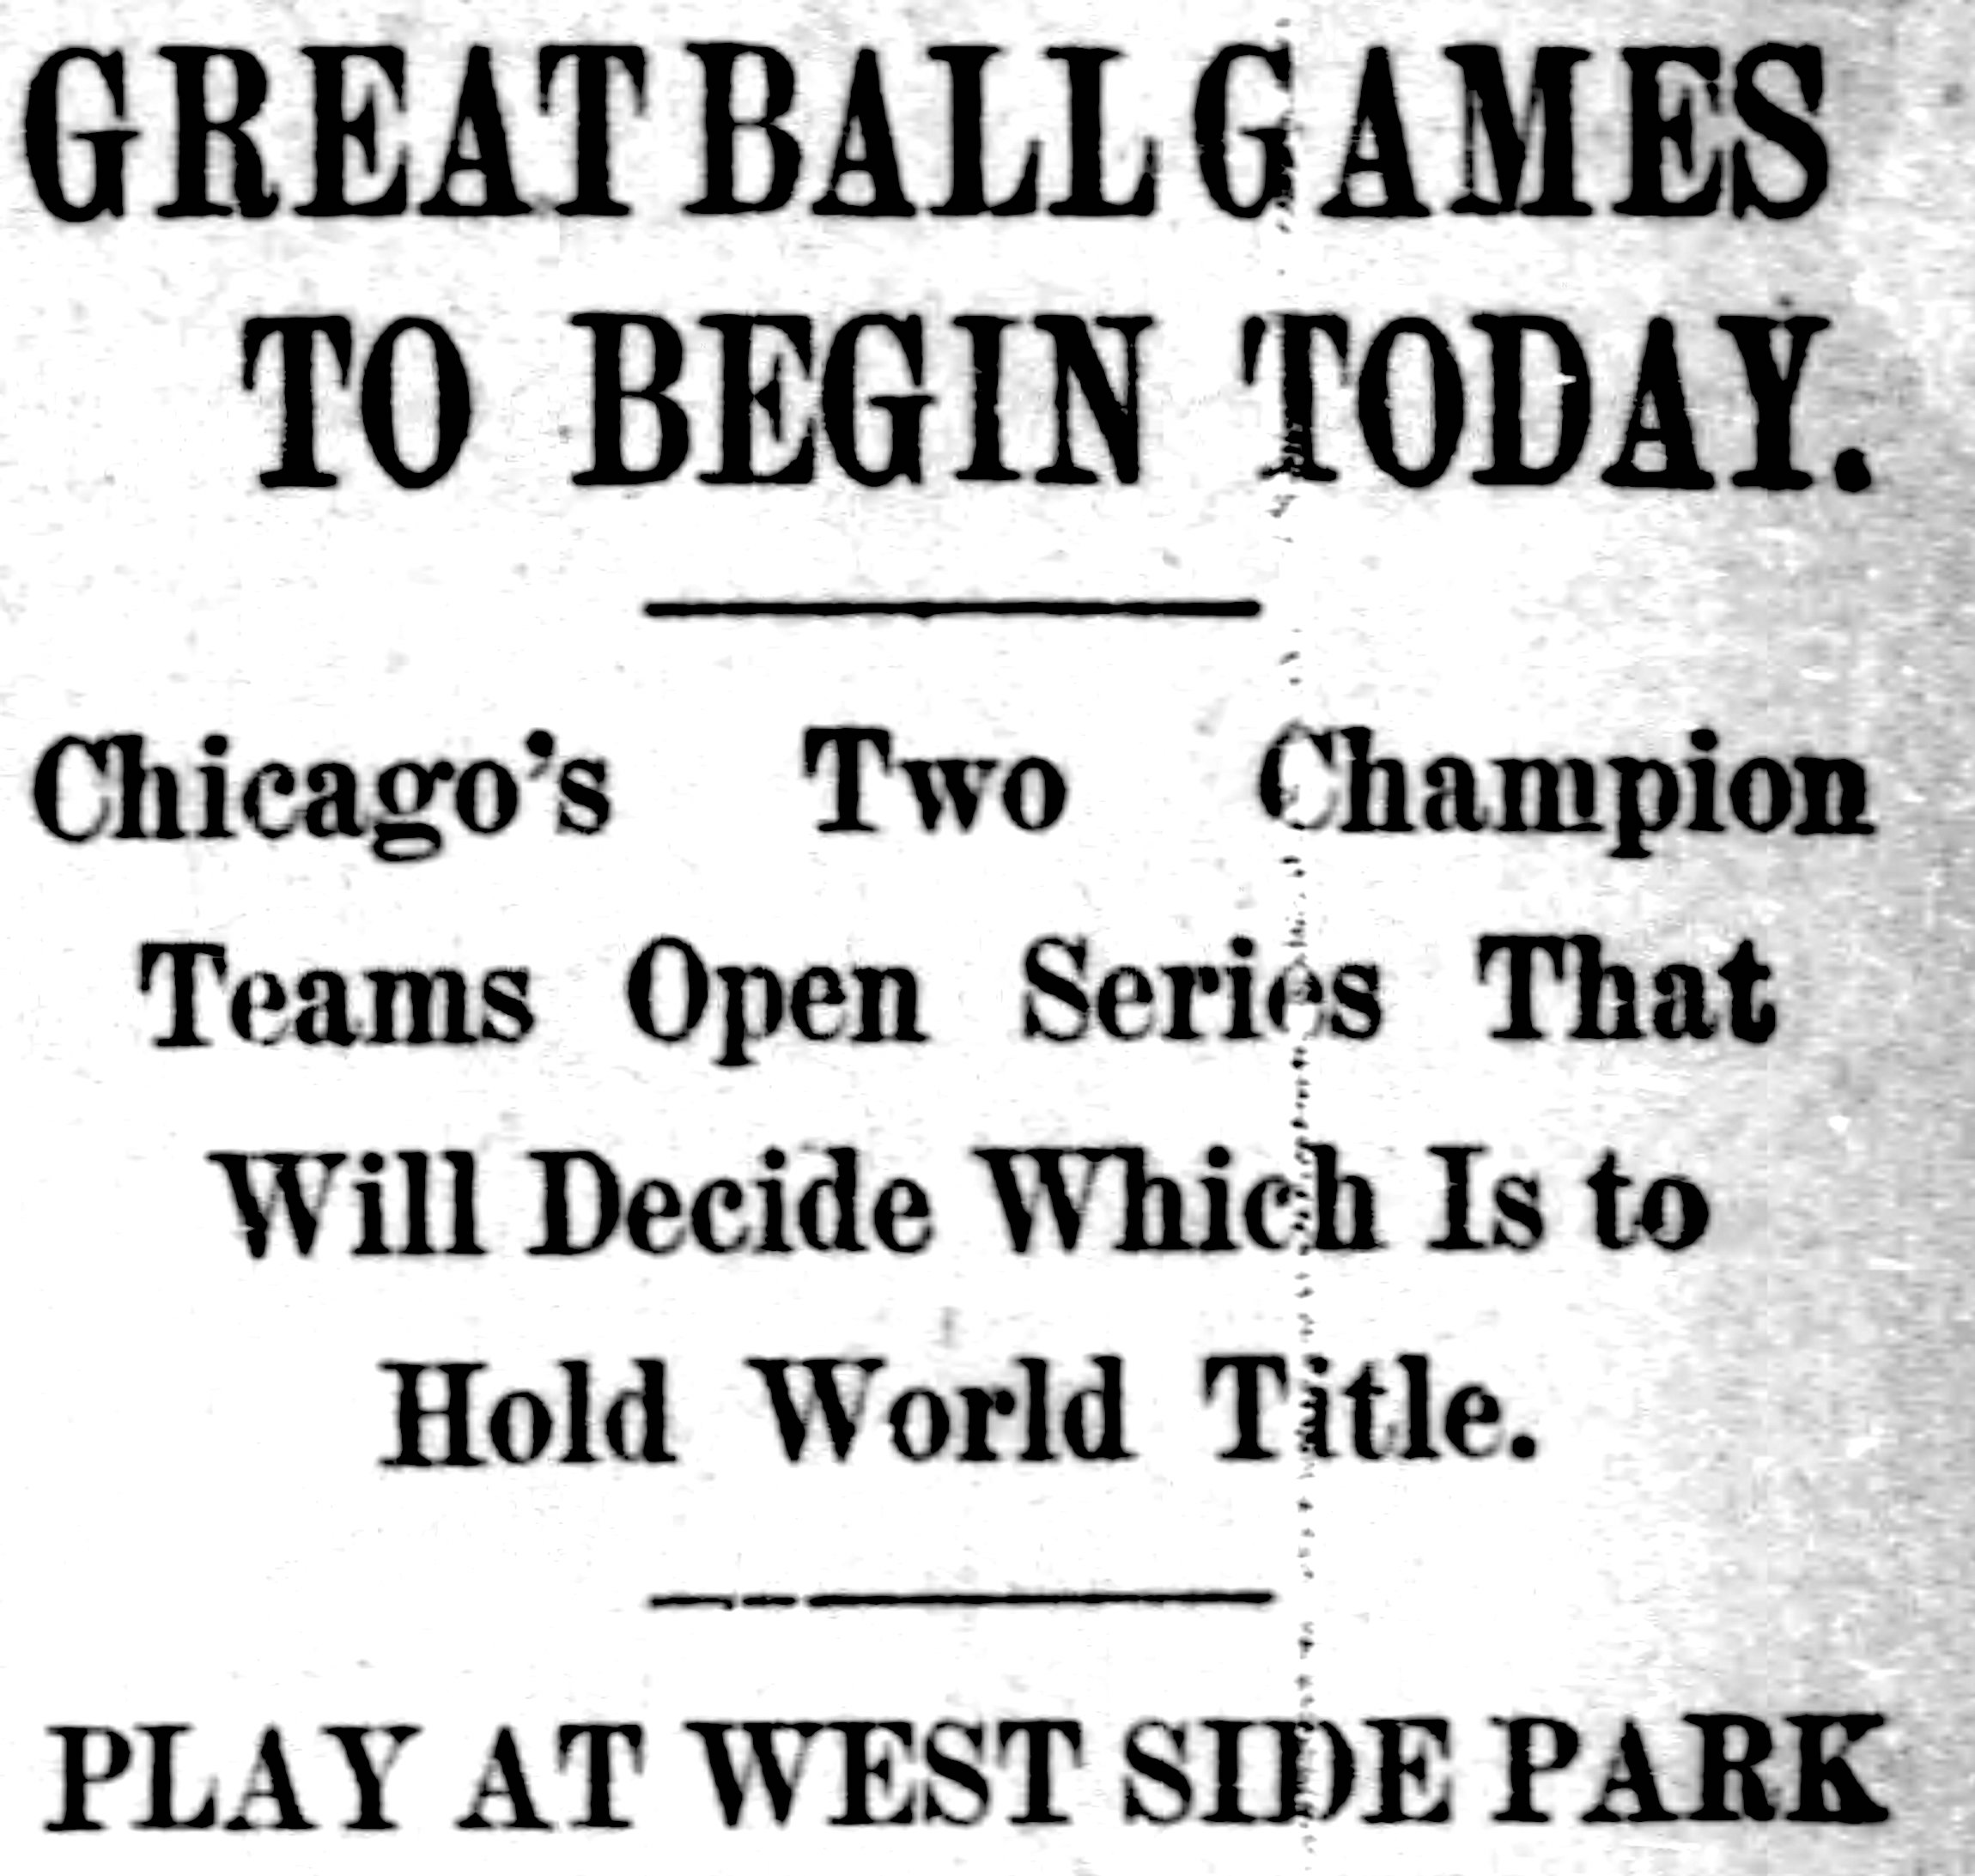 Flashback: The all Chicago World Series of 1906